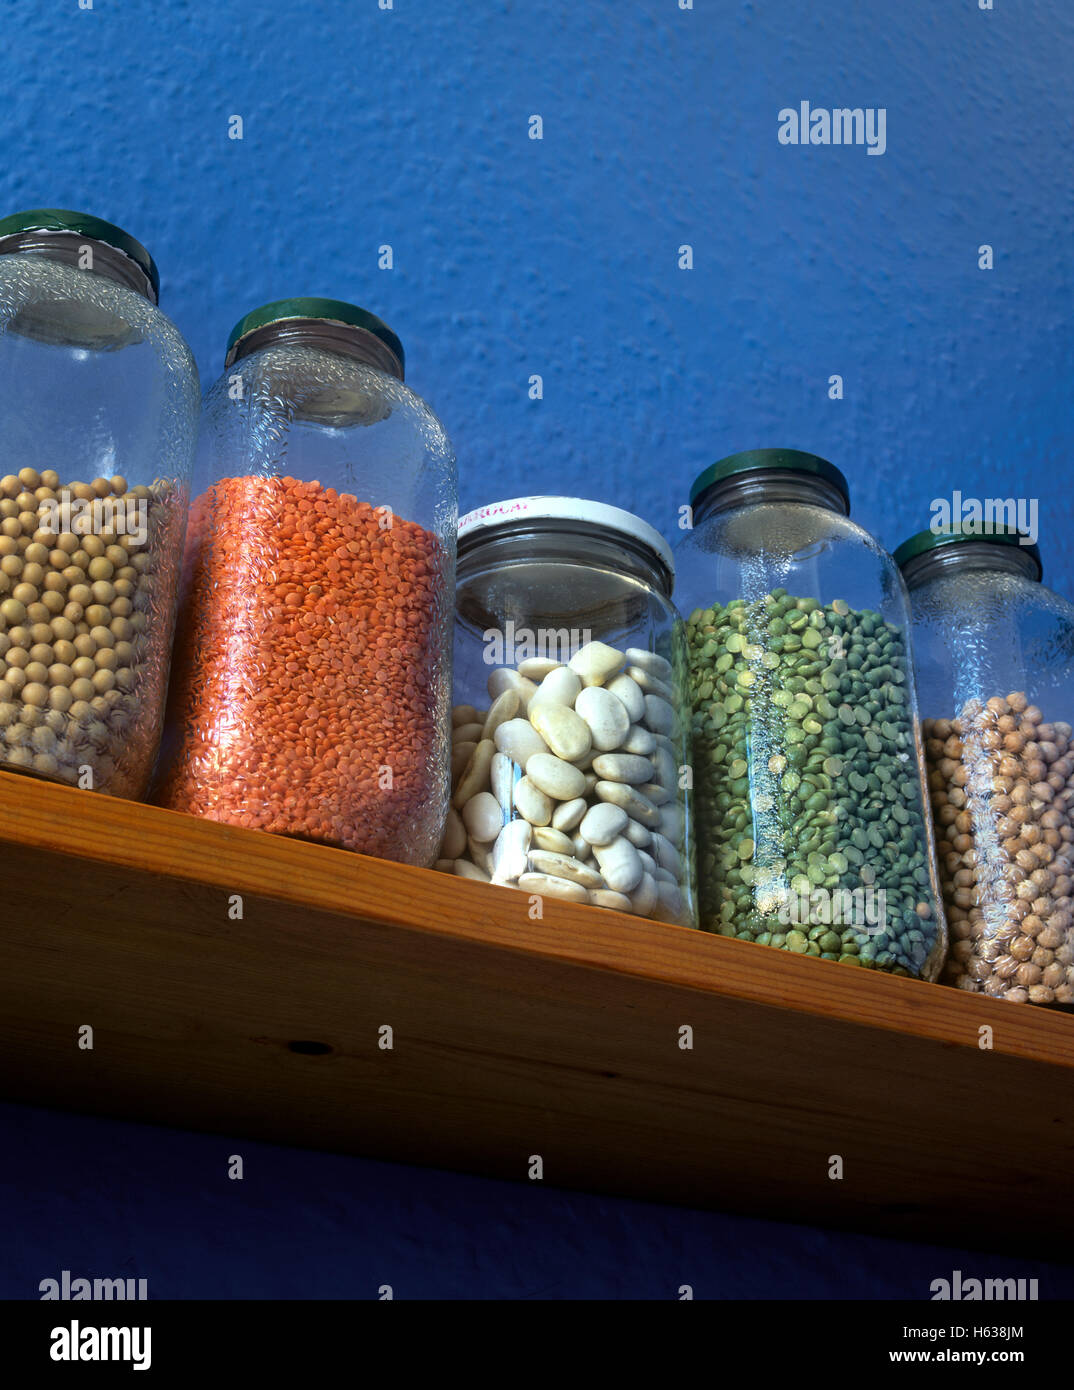 Pulses in storage jars on a kitchen shelf. From left: soya beans, red lentils, butter beans, green split peas, chick peas. Stock Photo